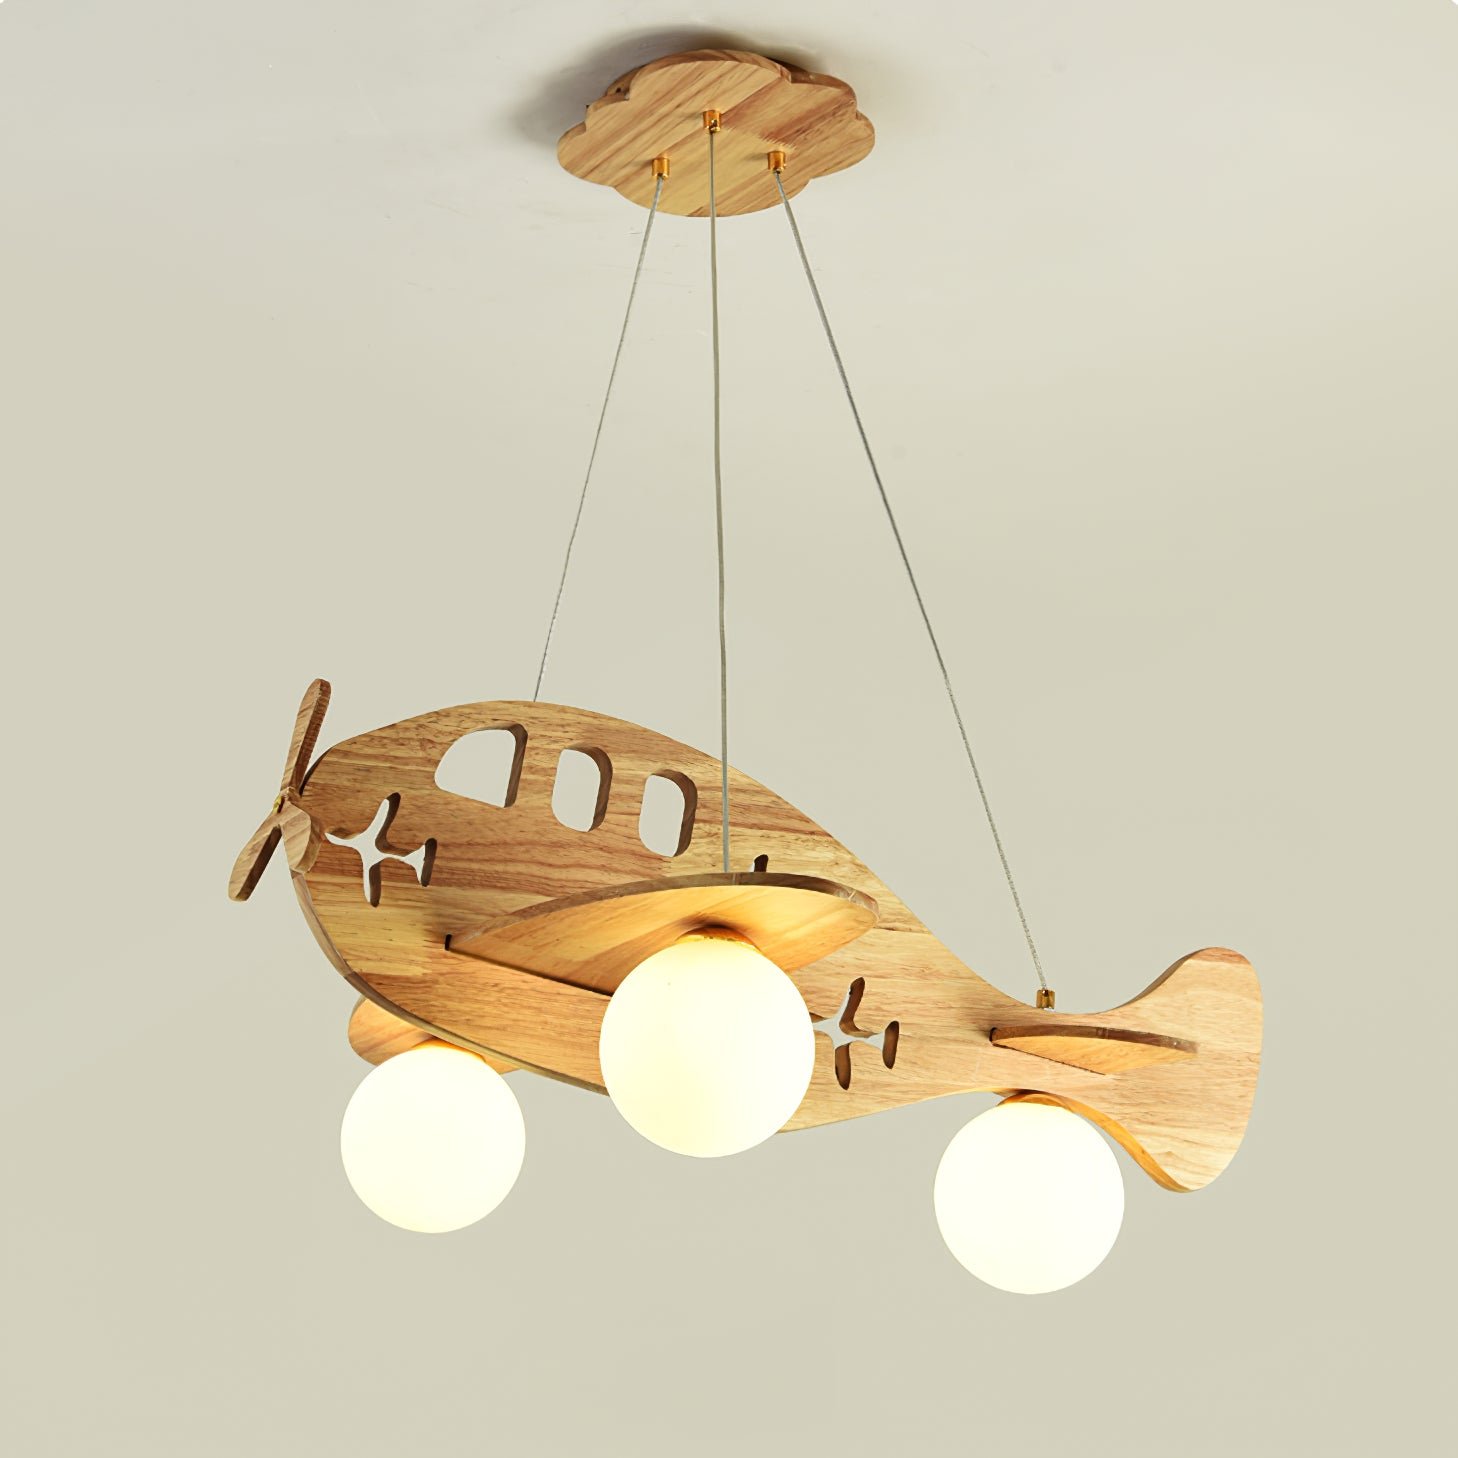 Wooden Airplane Pendant Lamp in White - Dimensions: Diameter 27.1" x Height 9" (69cm x 23cm)